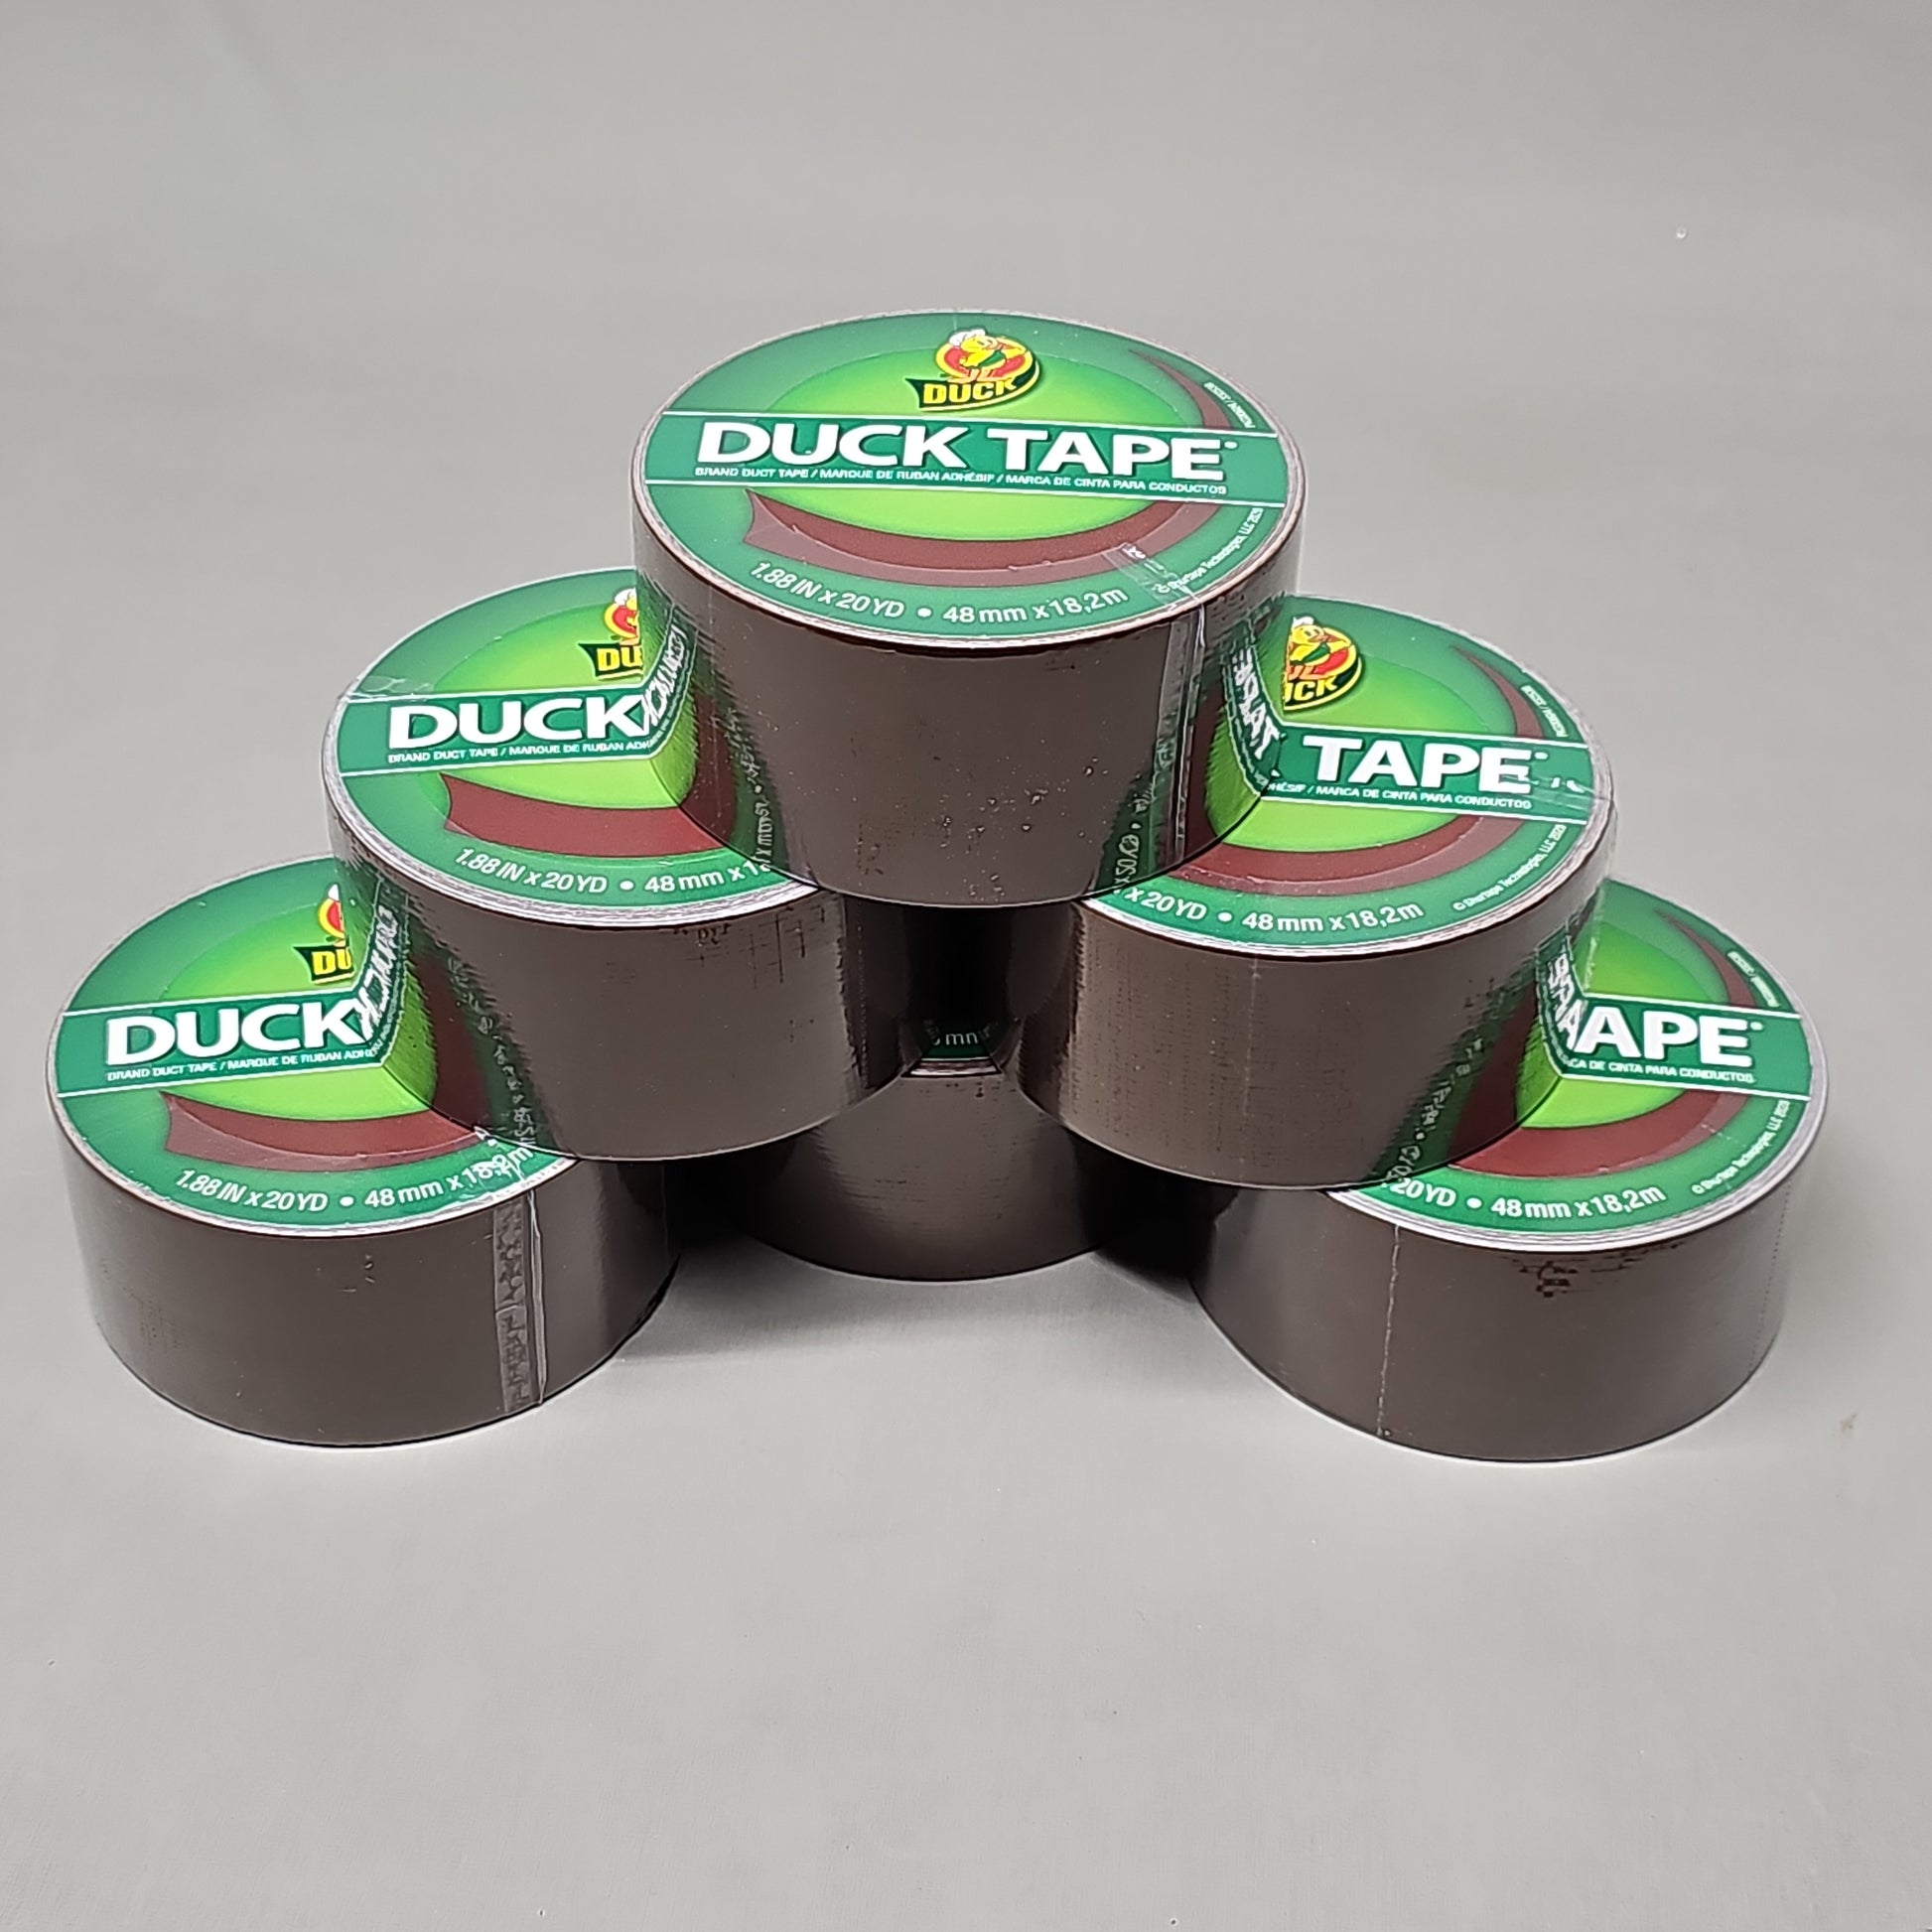  Duck Tape Colored Duct Tape, 1.88 In X 20 Yd, Red :  Learning: Supplies